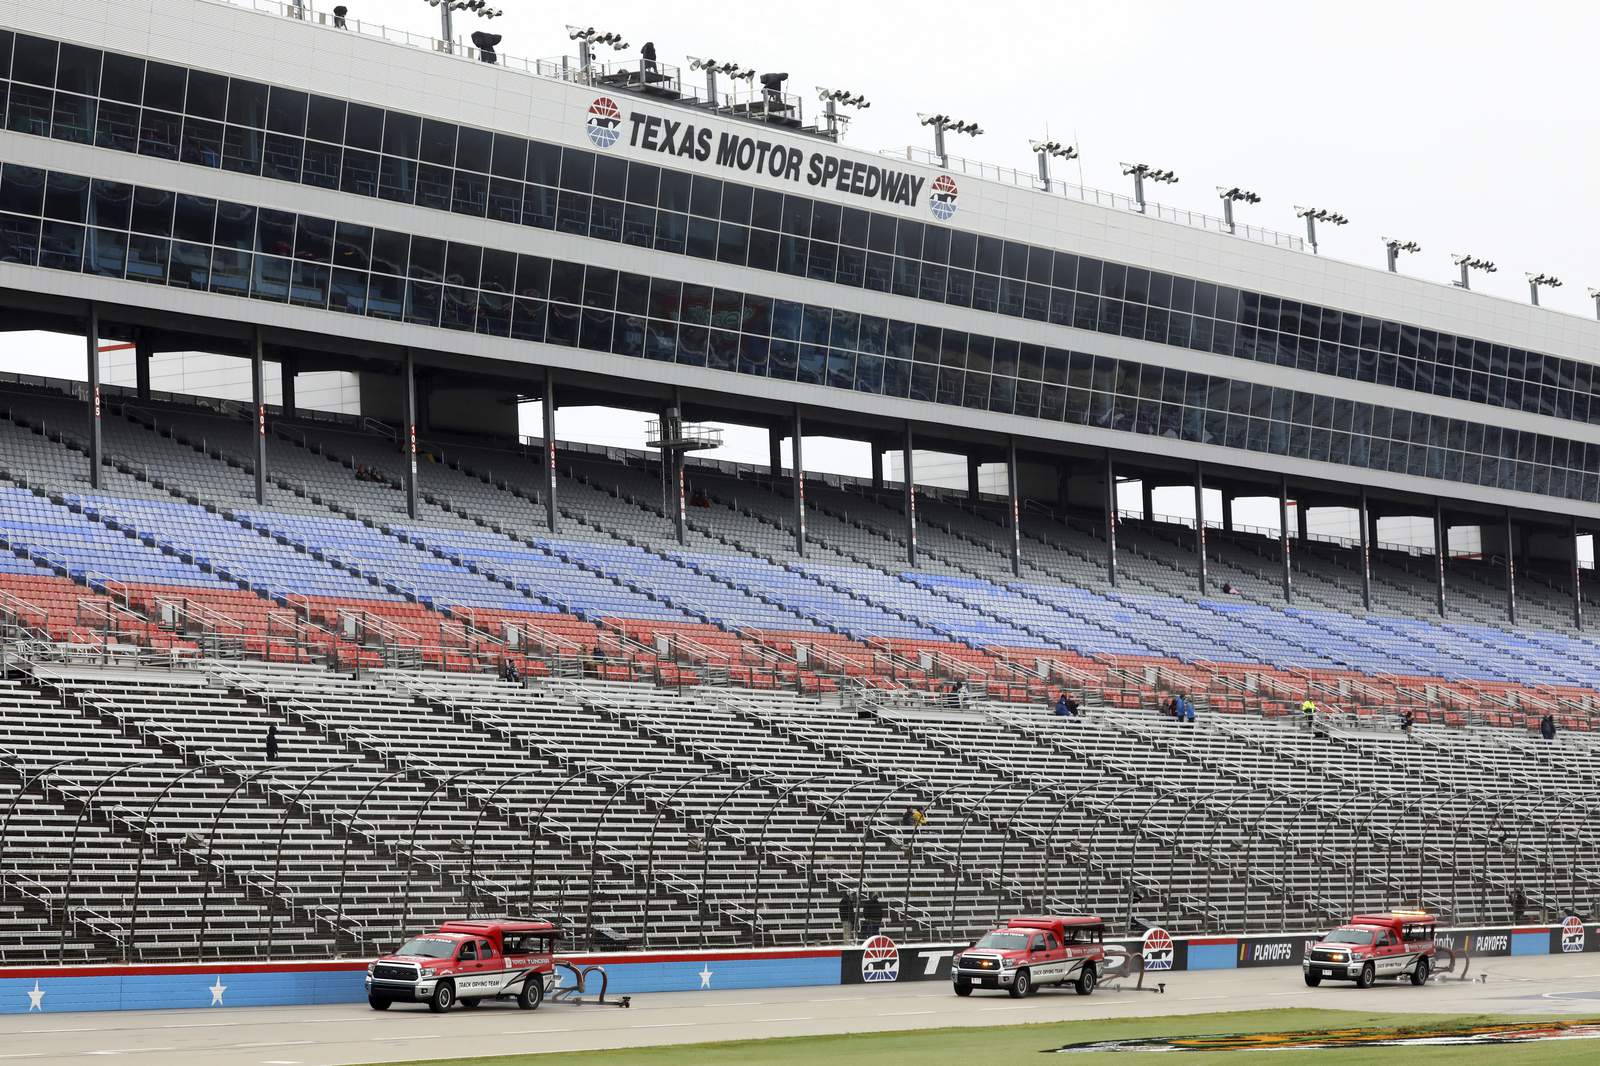 NASCAR playoffs rained out for 3rd consecutive day at Texas